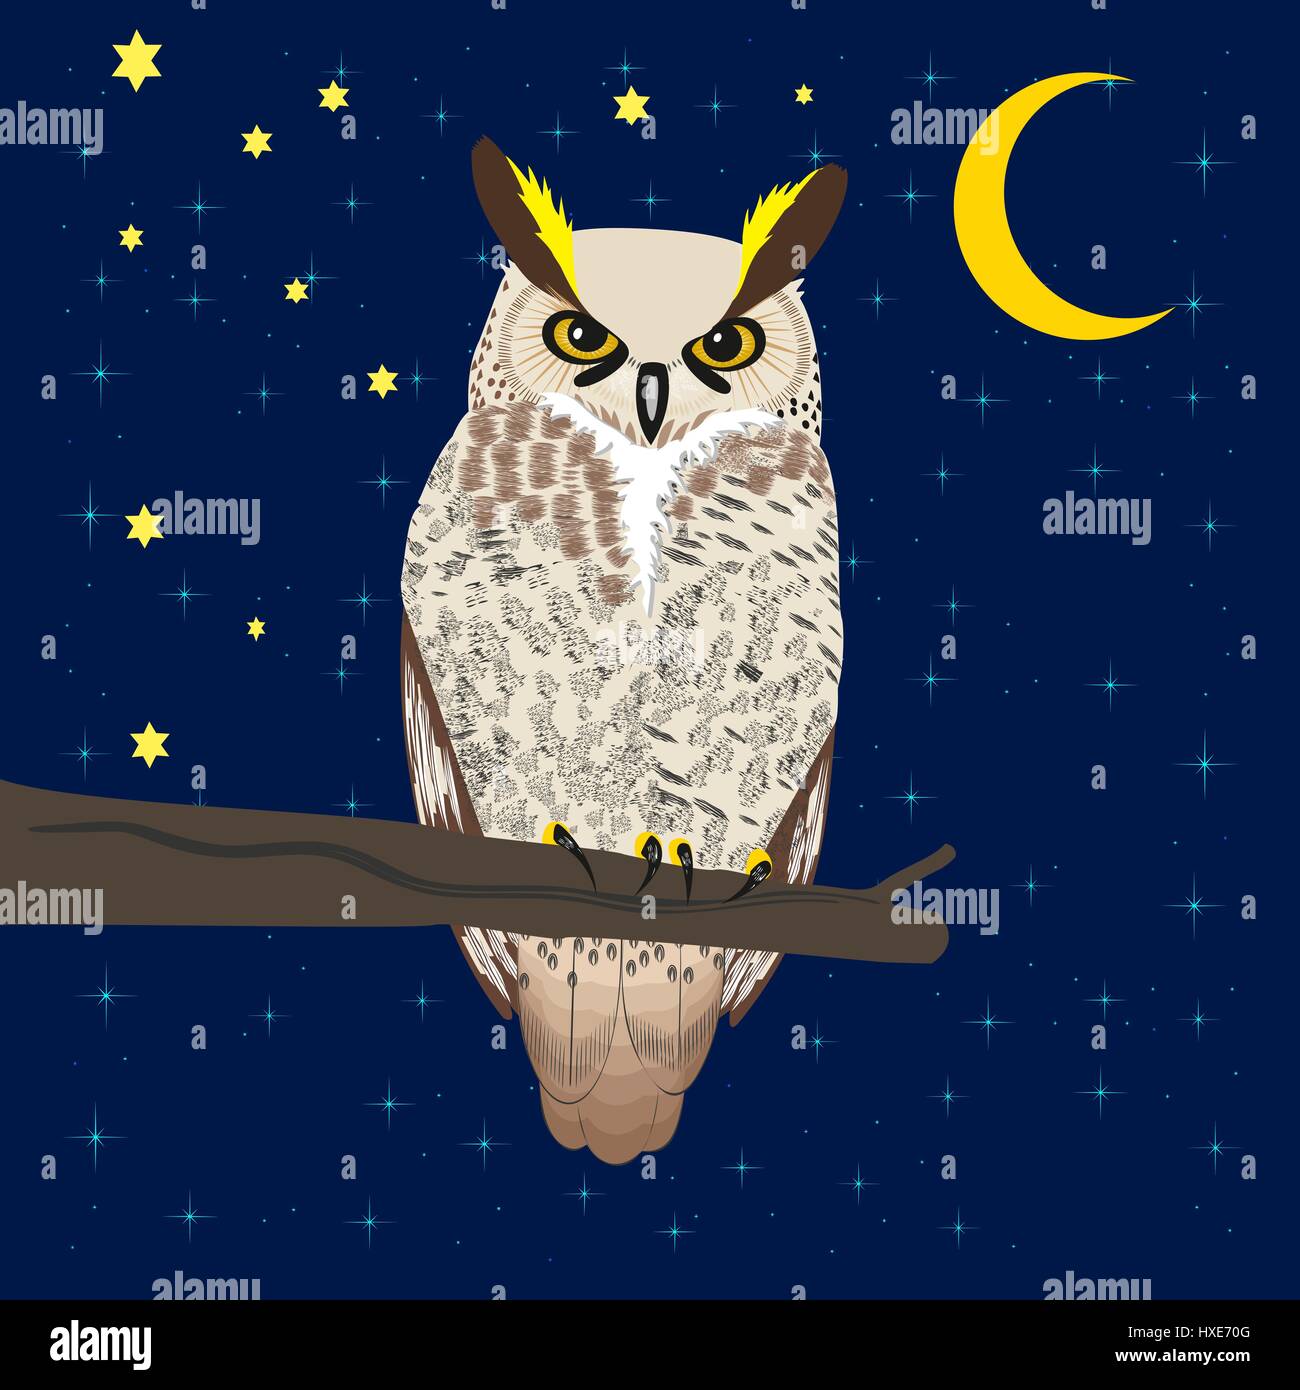 Owl sits on a tree branch under the moon and starry sky Stock Vector